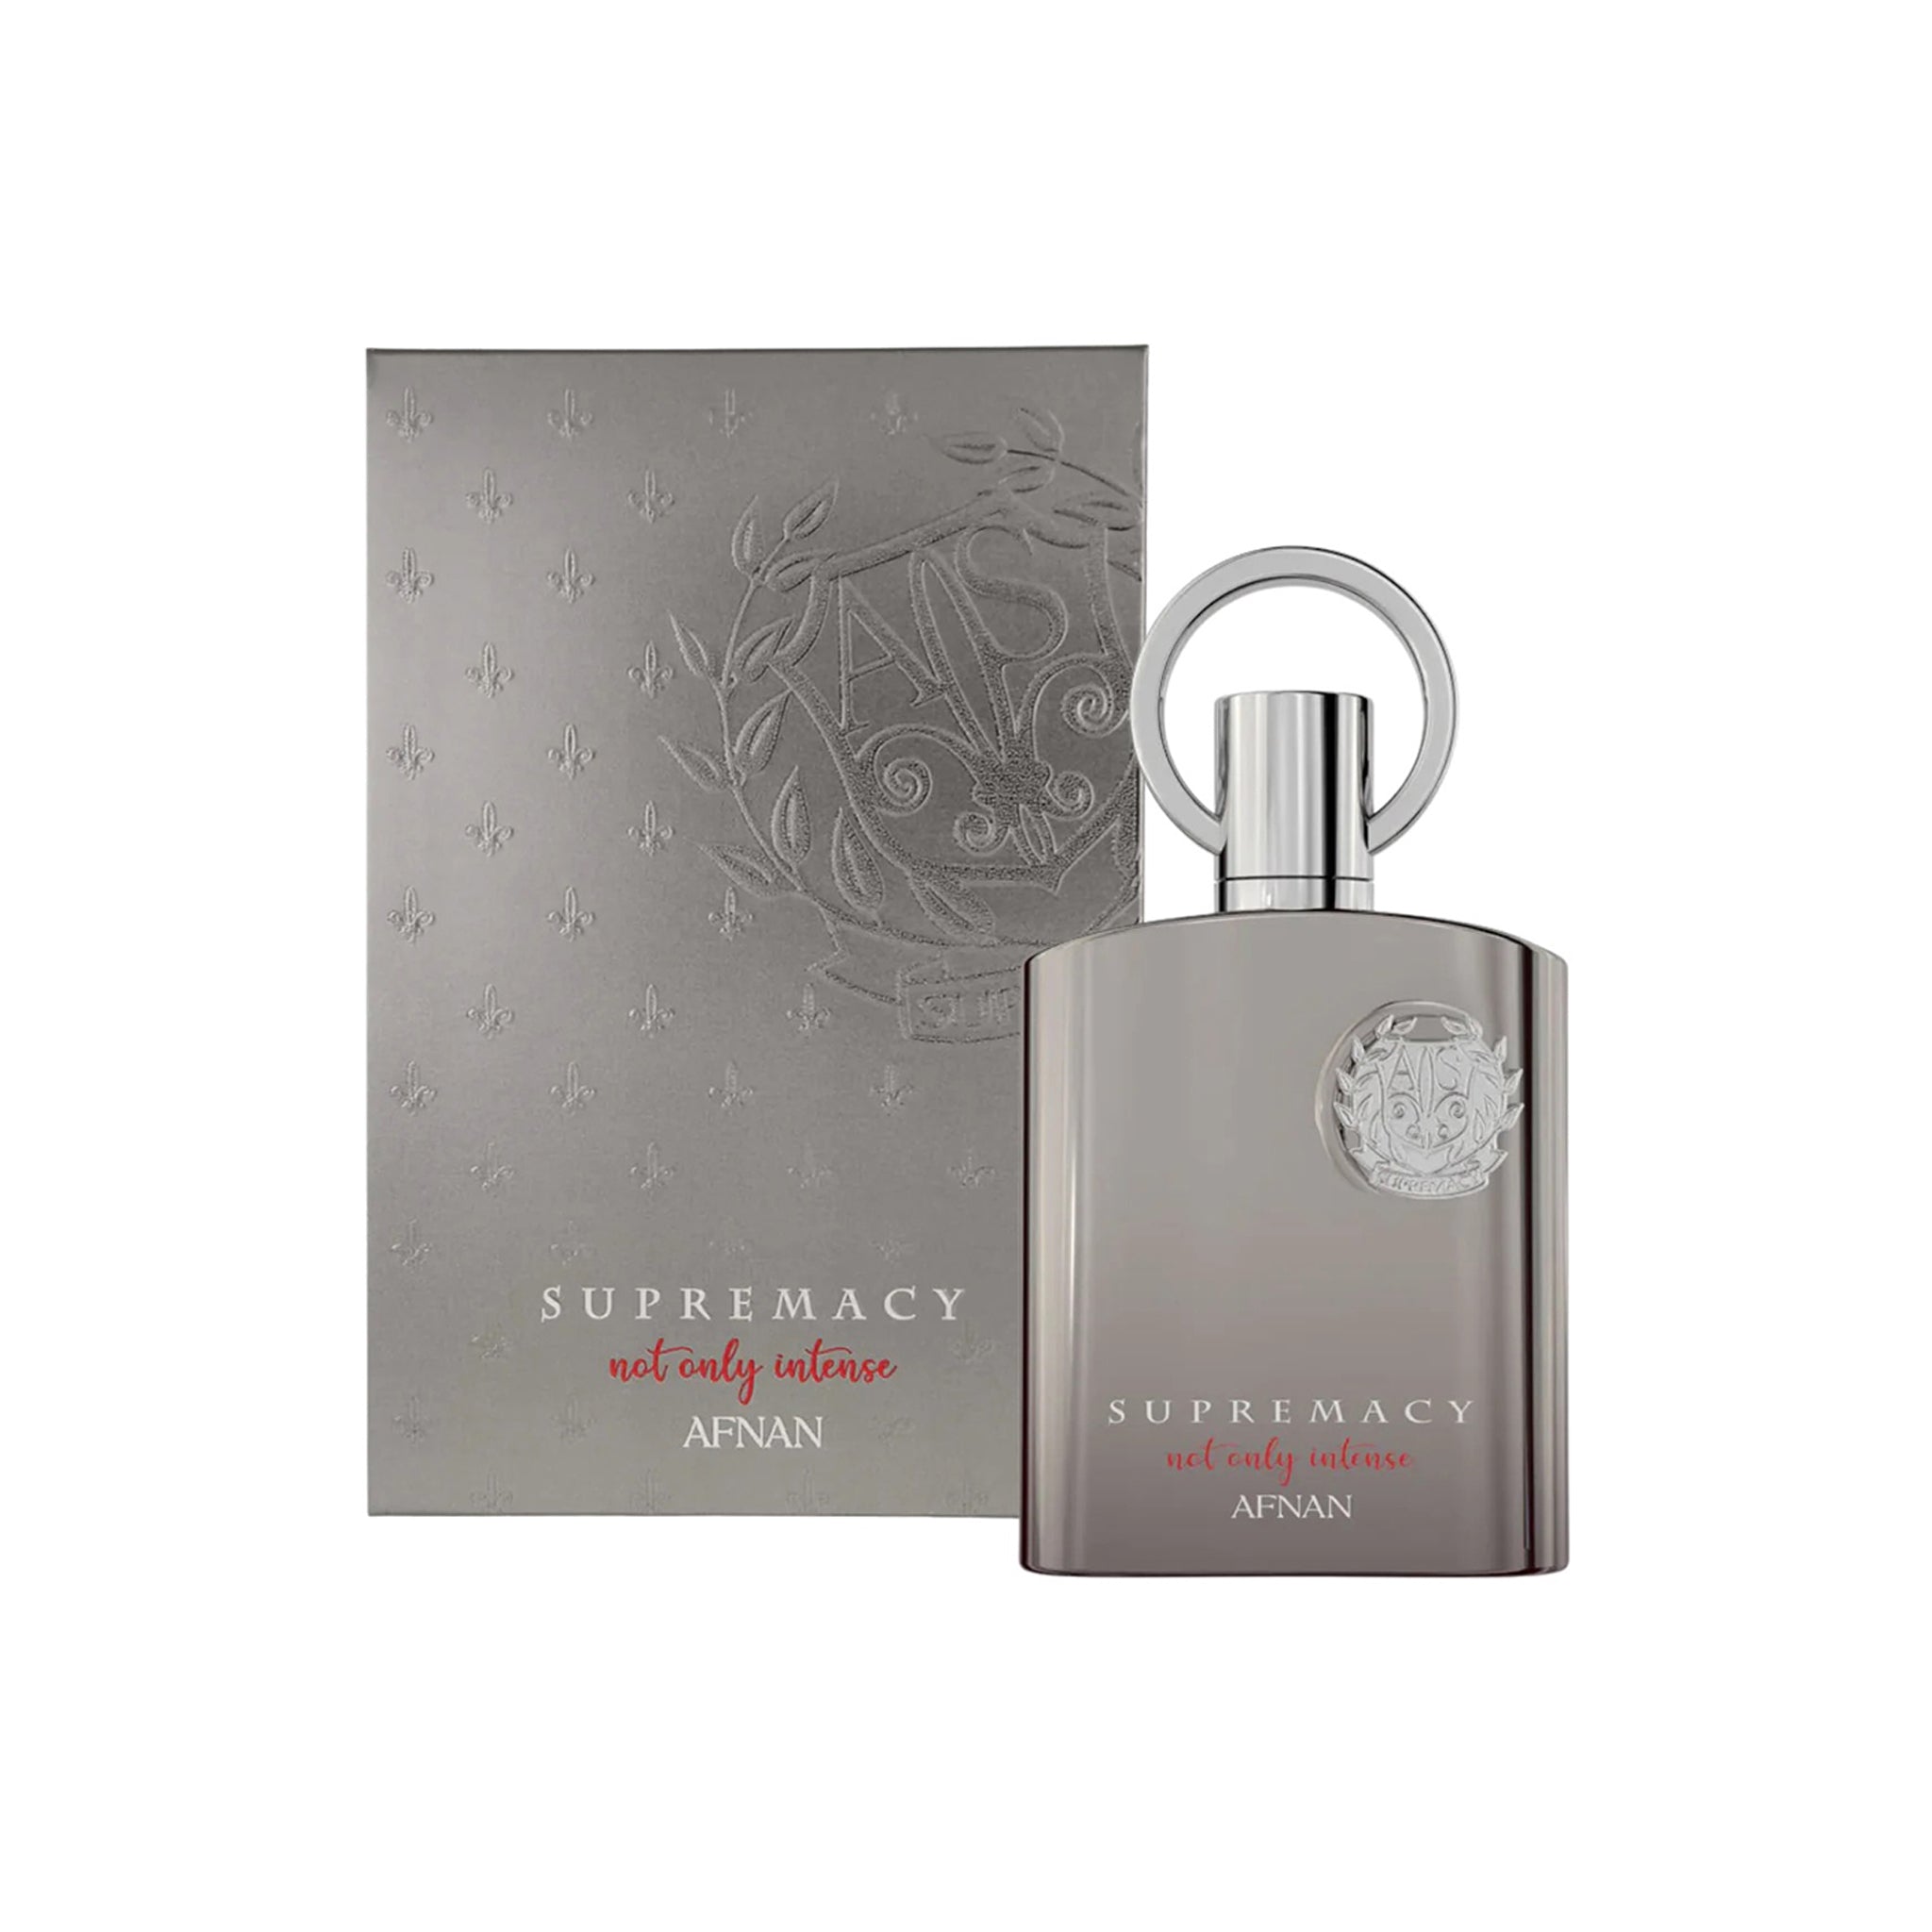 Supremacy Not only Intense 100ml EDP by Afnan